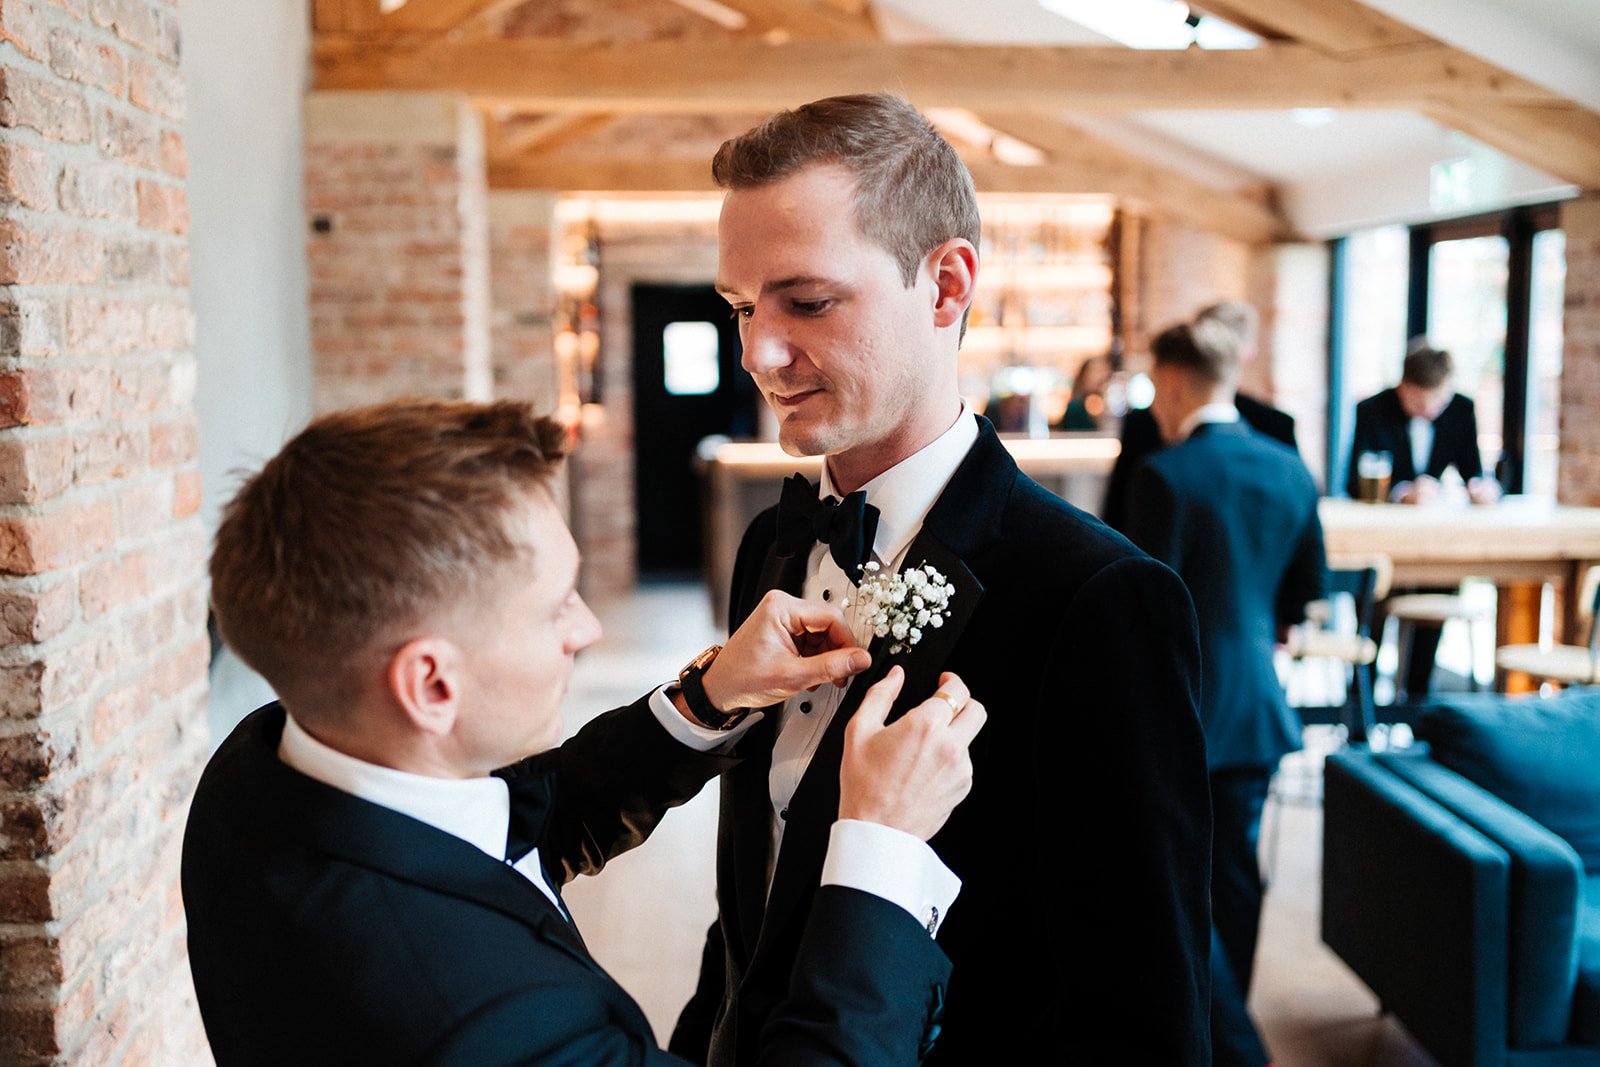 A groomsman does the grooms buttonhole ahead of the wedding ceremony at Thirsk Lodge Barns